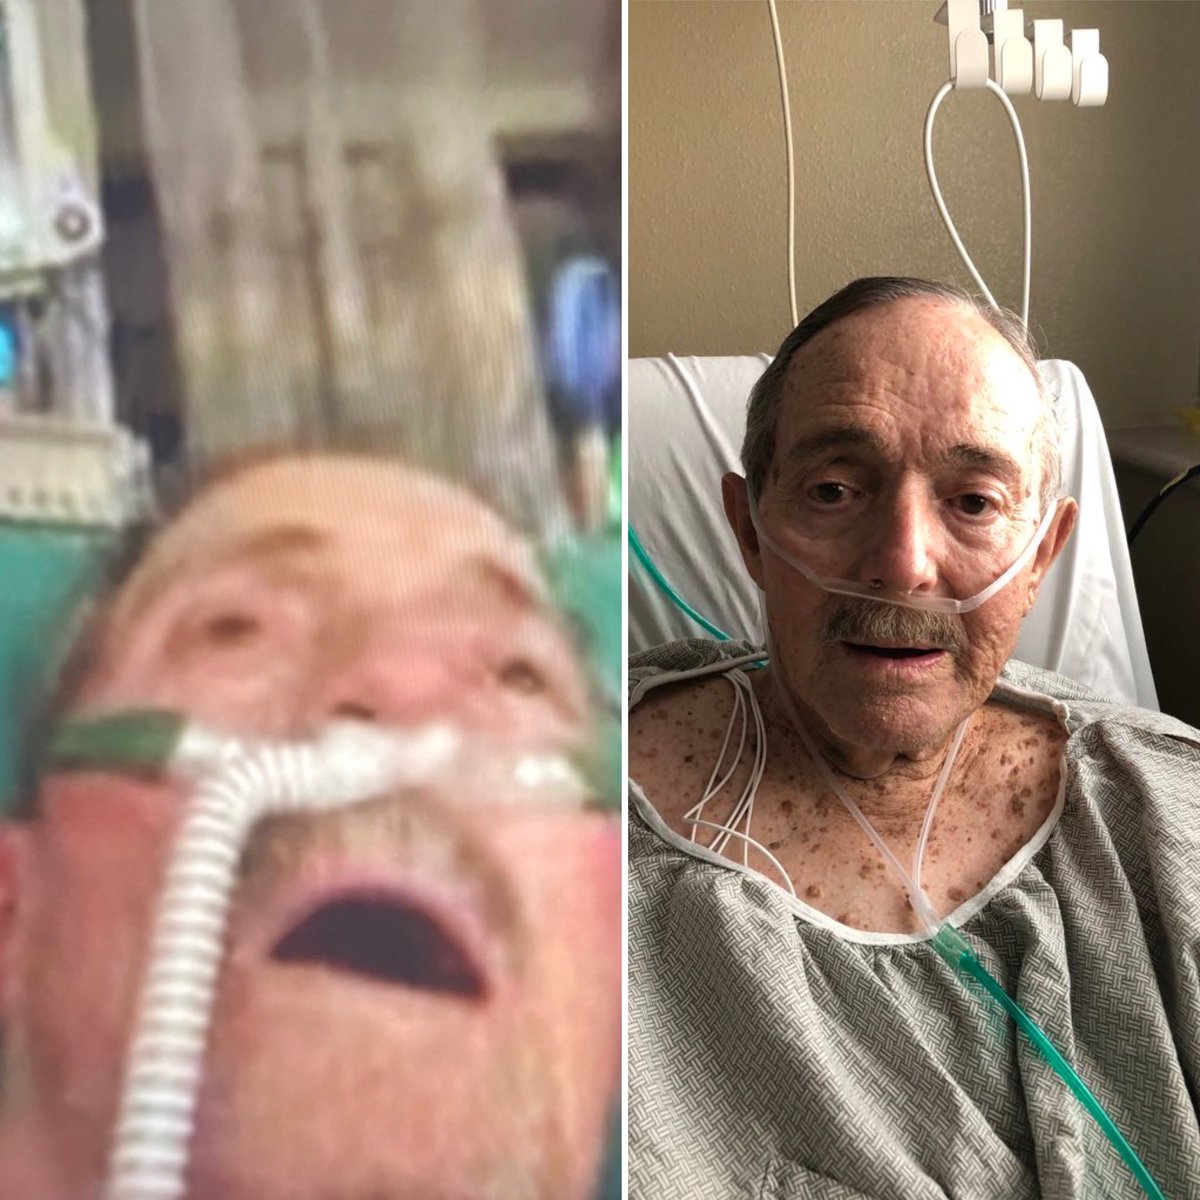 The pic on the left was my Dad 8 days ago when they told me he would likely die. I moved him the next day. The pic on the right was 5 days later. Transfer your loved one if something feels off.